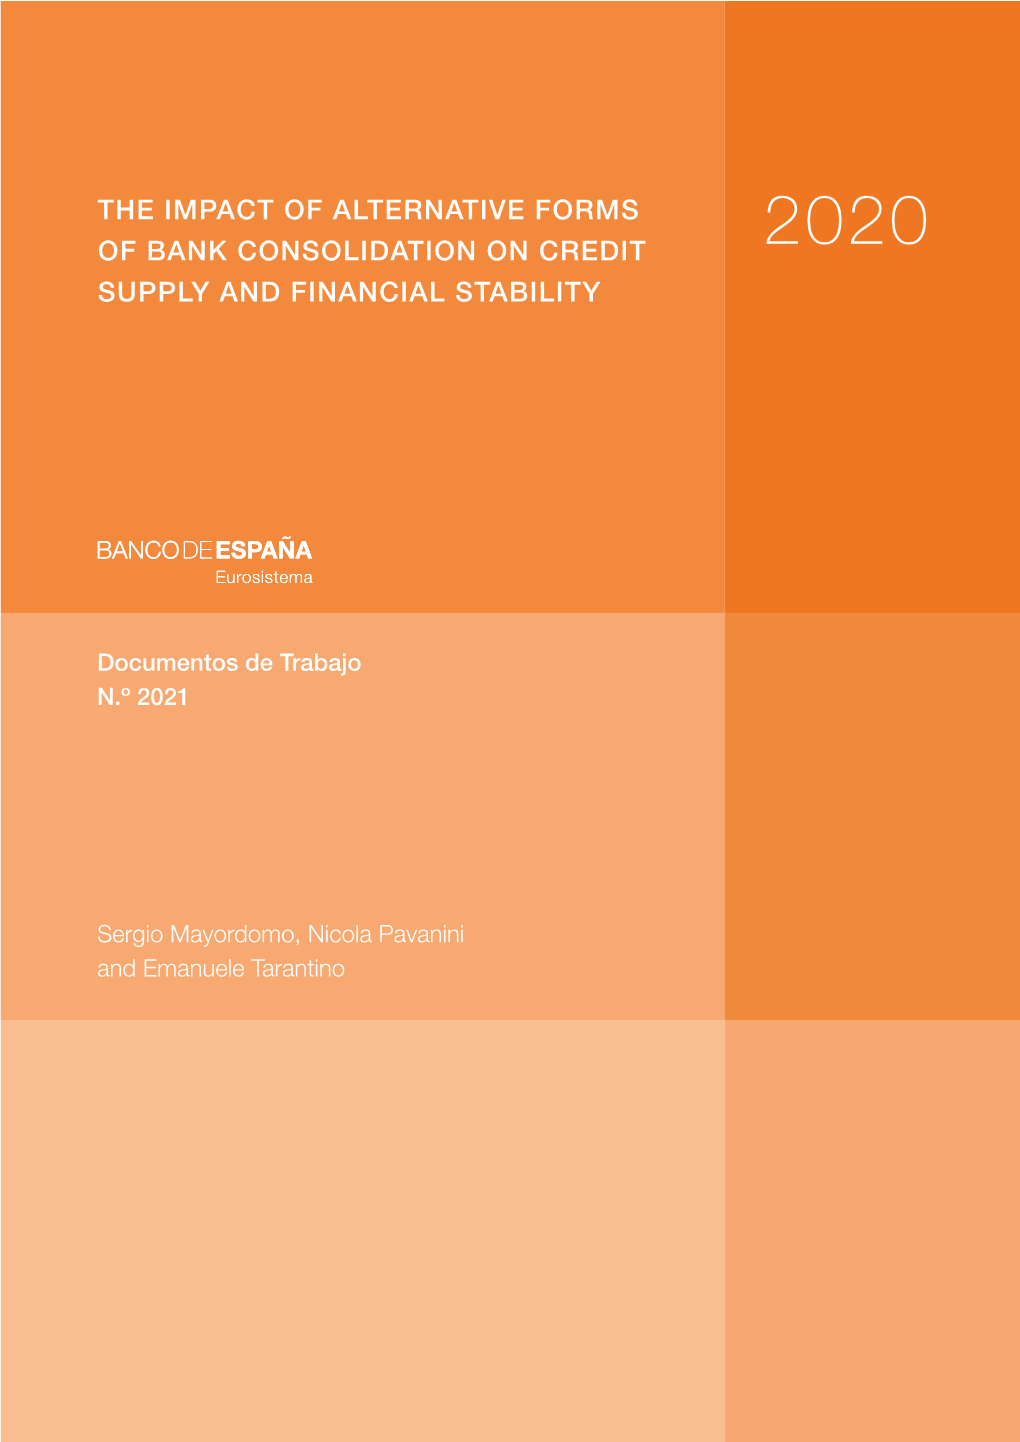 The Impact of Alternative Forms of Bank Consolidation on Credit Supply And